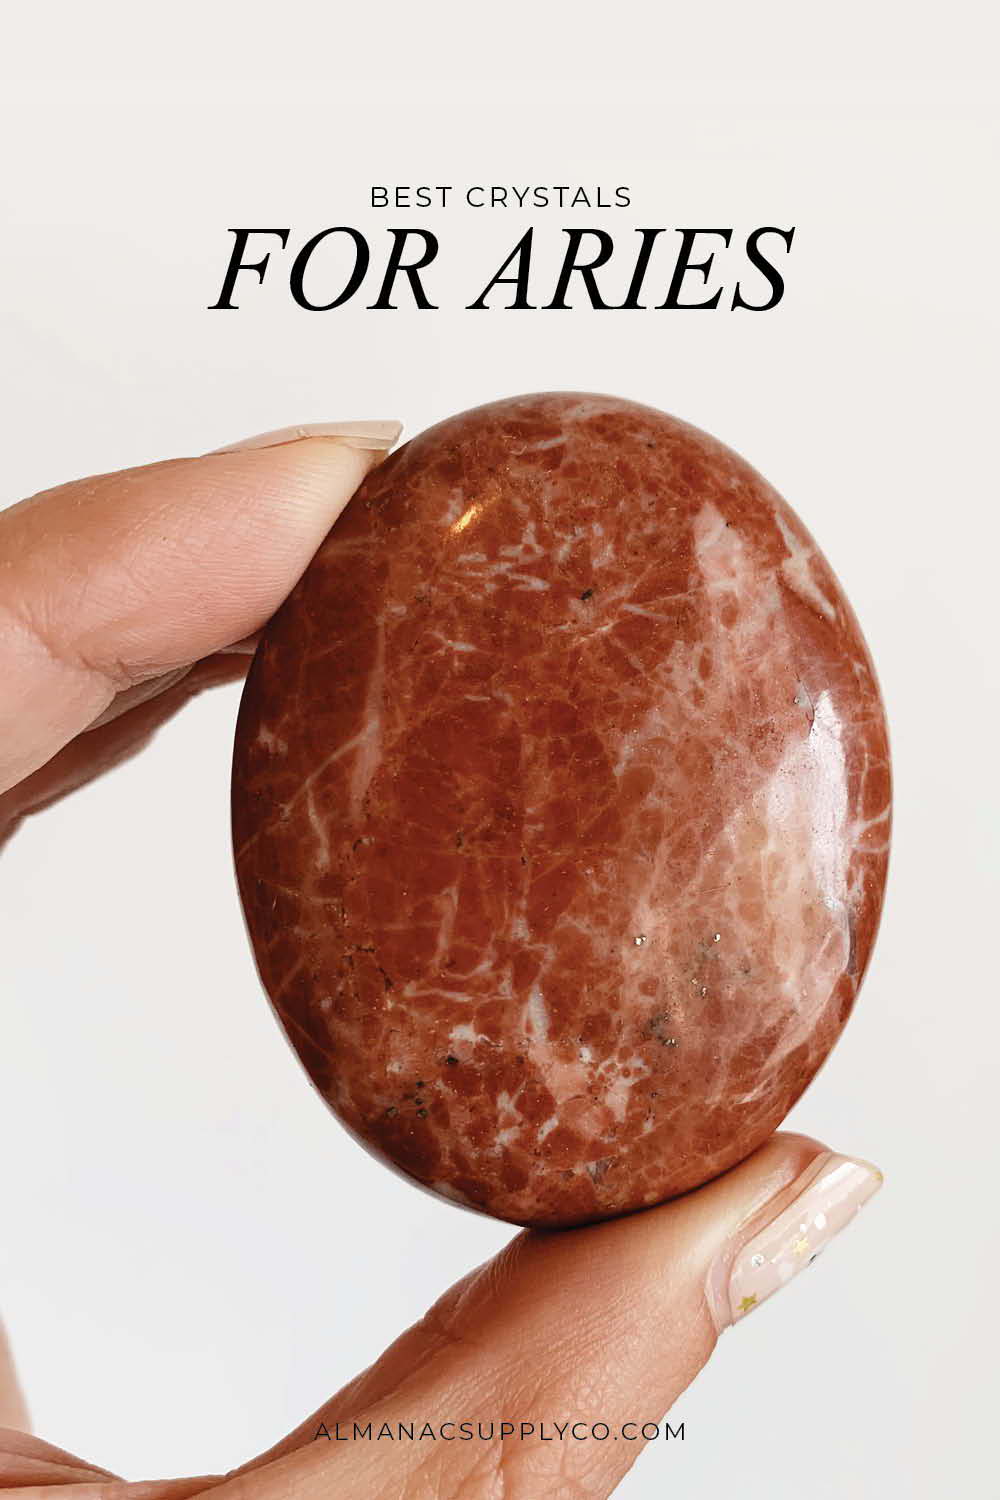 The Best Crystals for Aries